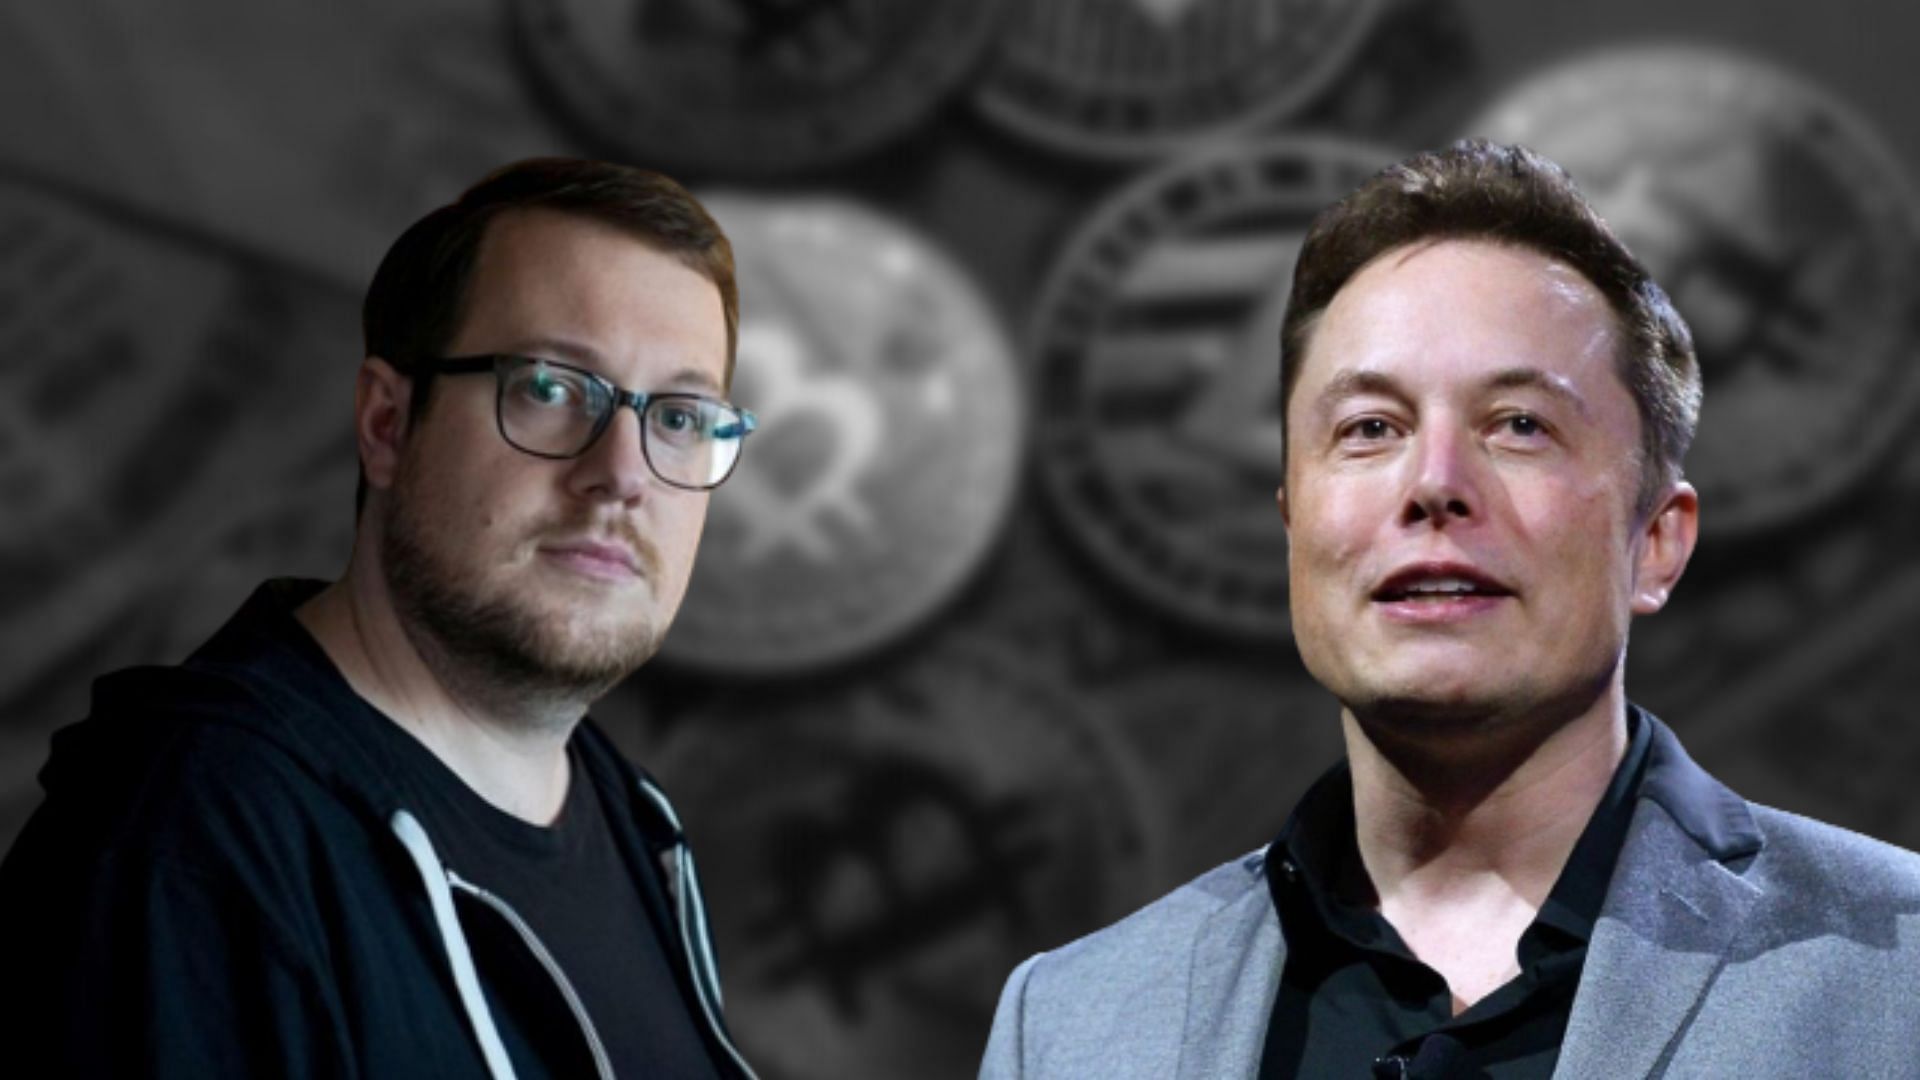 <div class="paragraphs"><p>After being endorsed by the likes of Snoop Dogg, Gene Simmons, and <a href="https://www.thequint.com/topic/elon-musk">Elon Musk</a>, Dogecoin has become one of the world’s most popular cryptocurrencies, with a market cap of over $10 billion.</p></div>